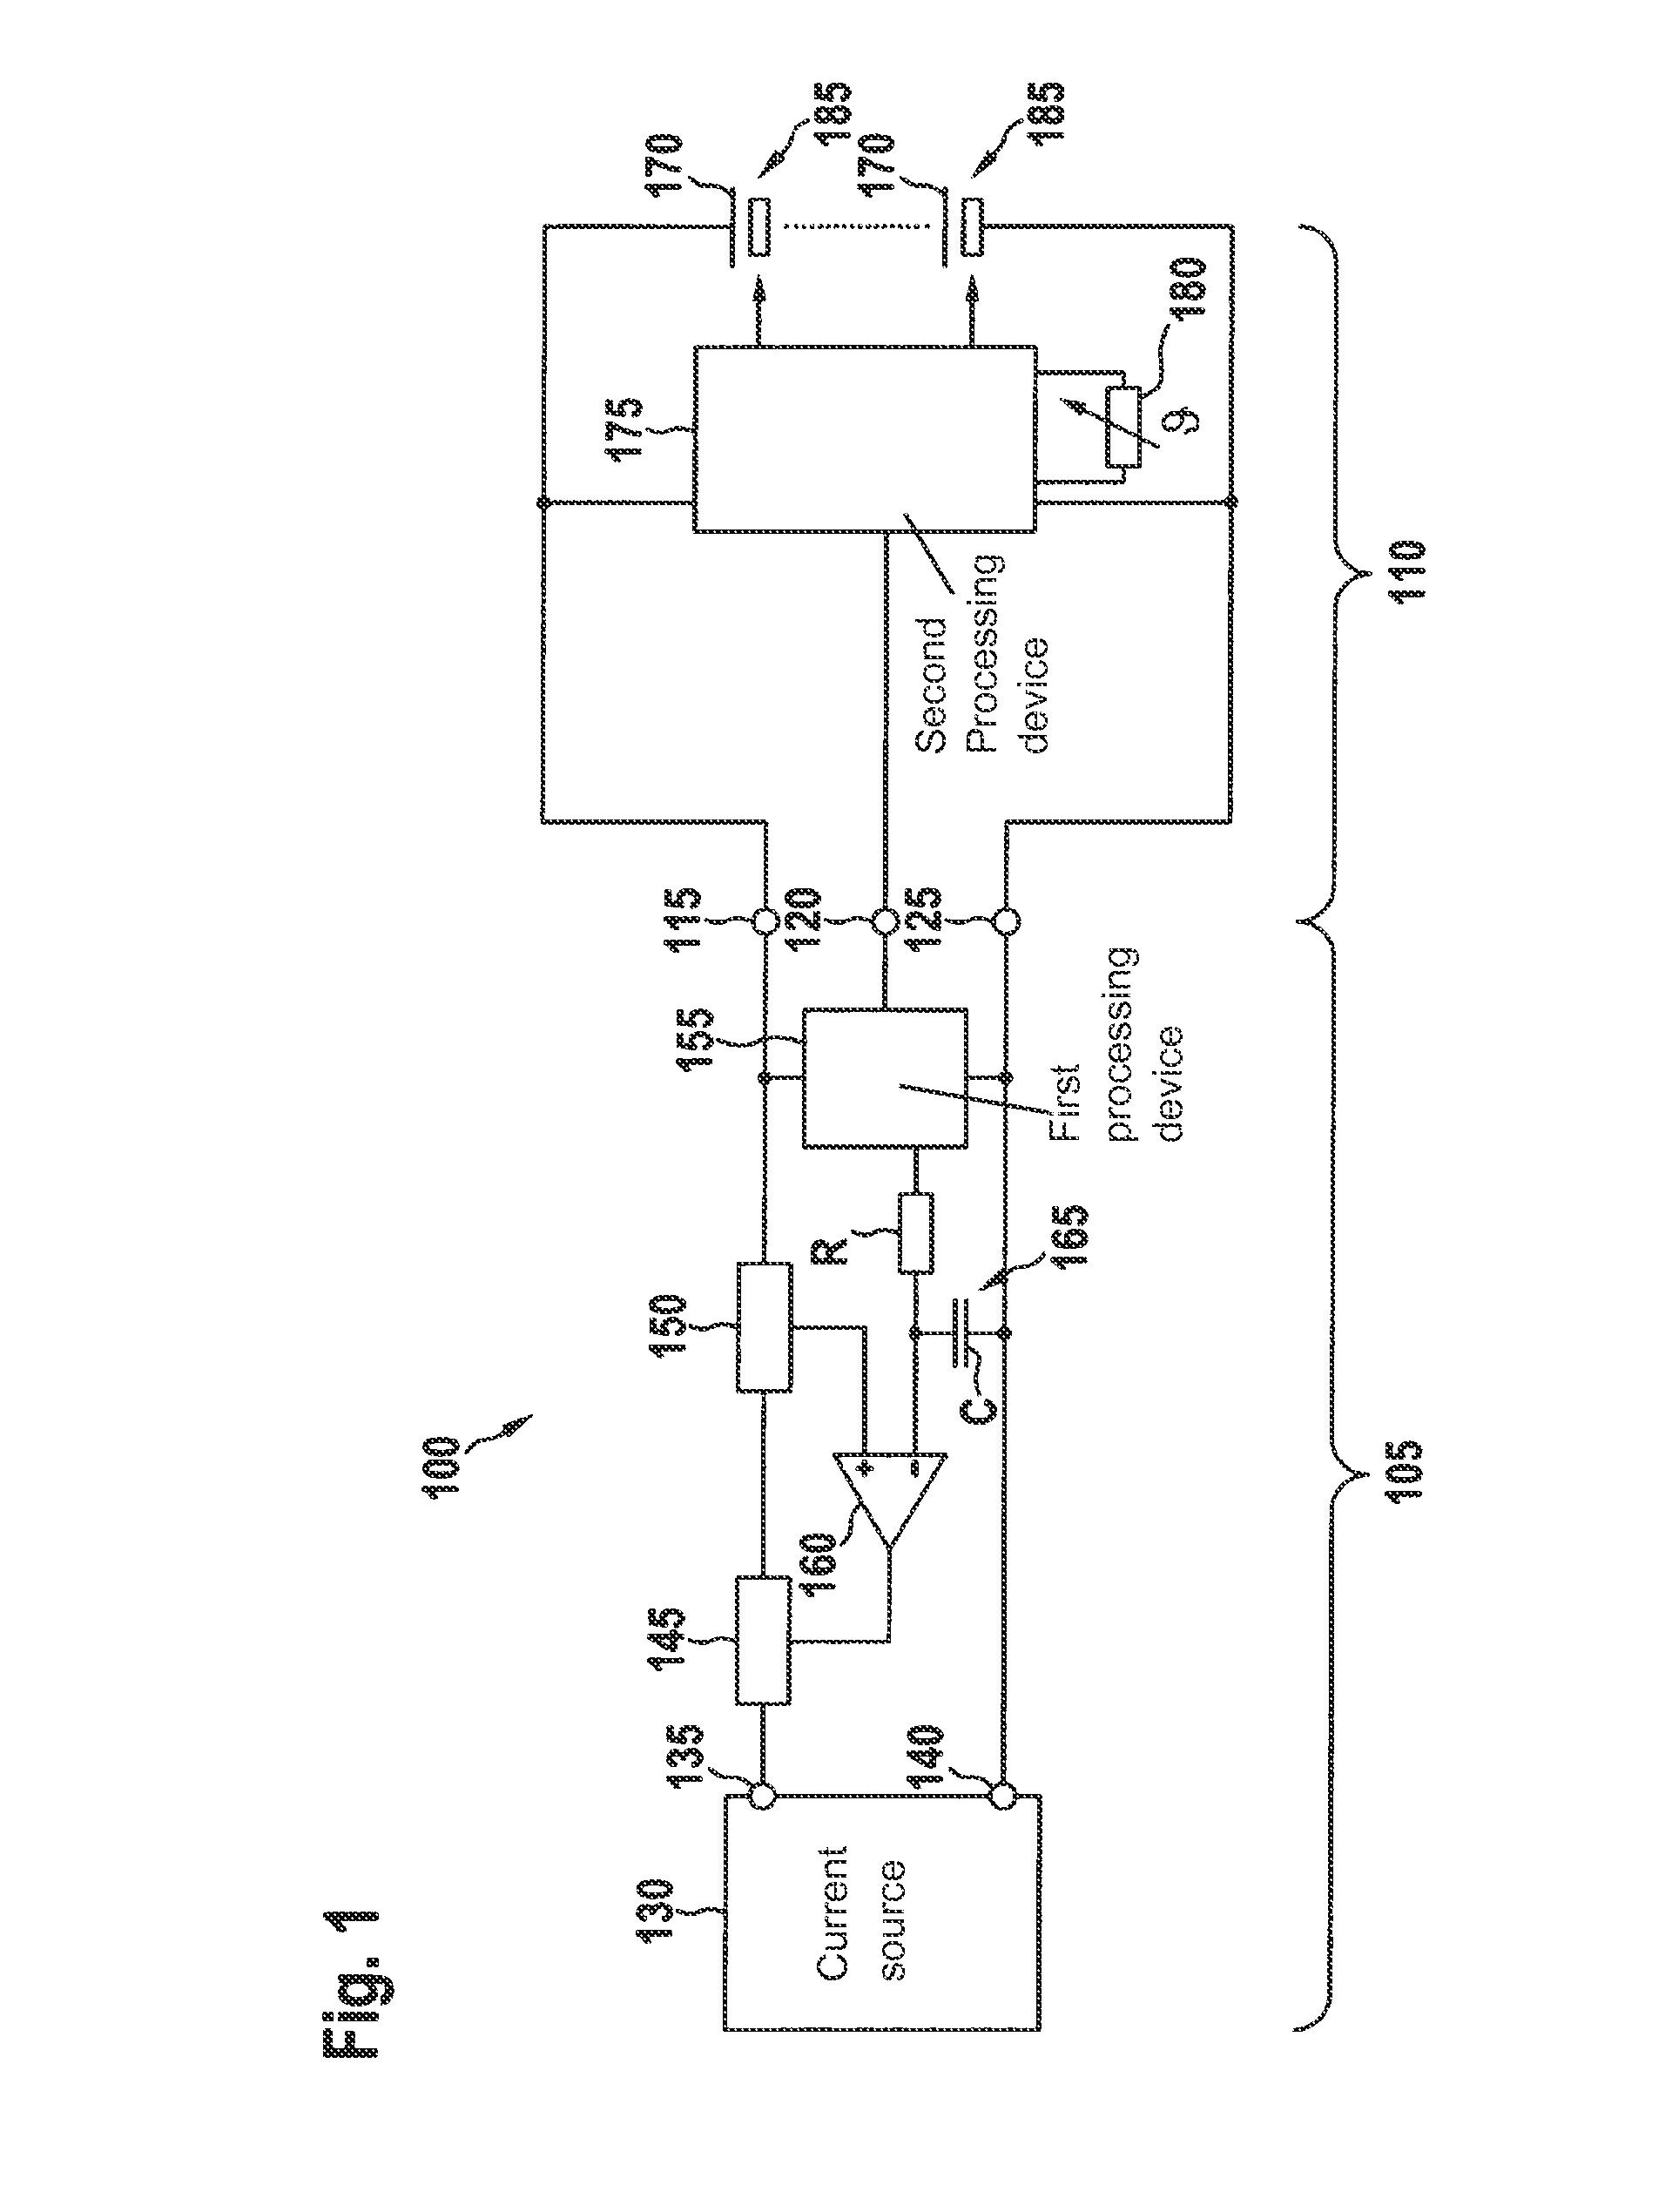 Electrically chargeable energy store device and method of charging